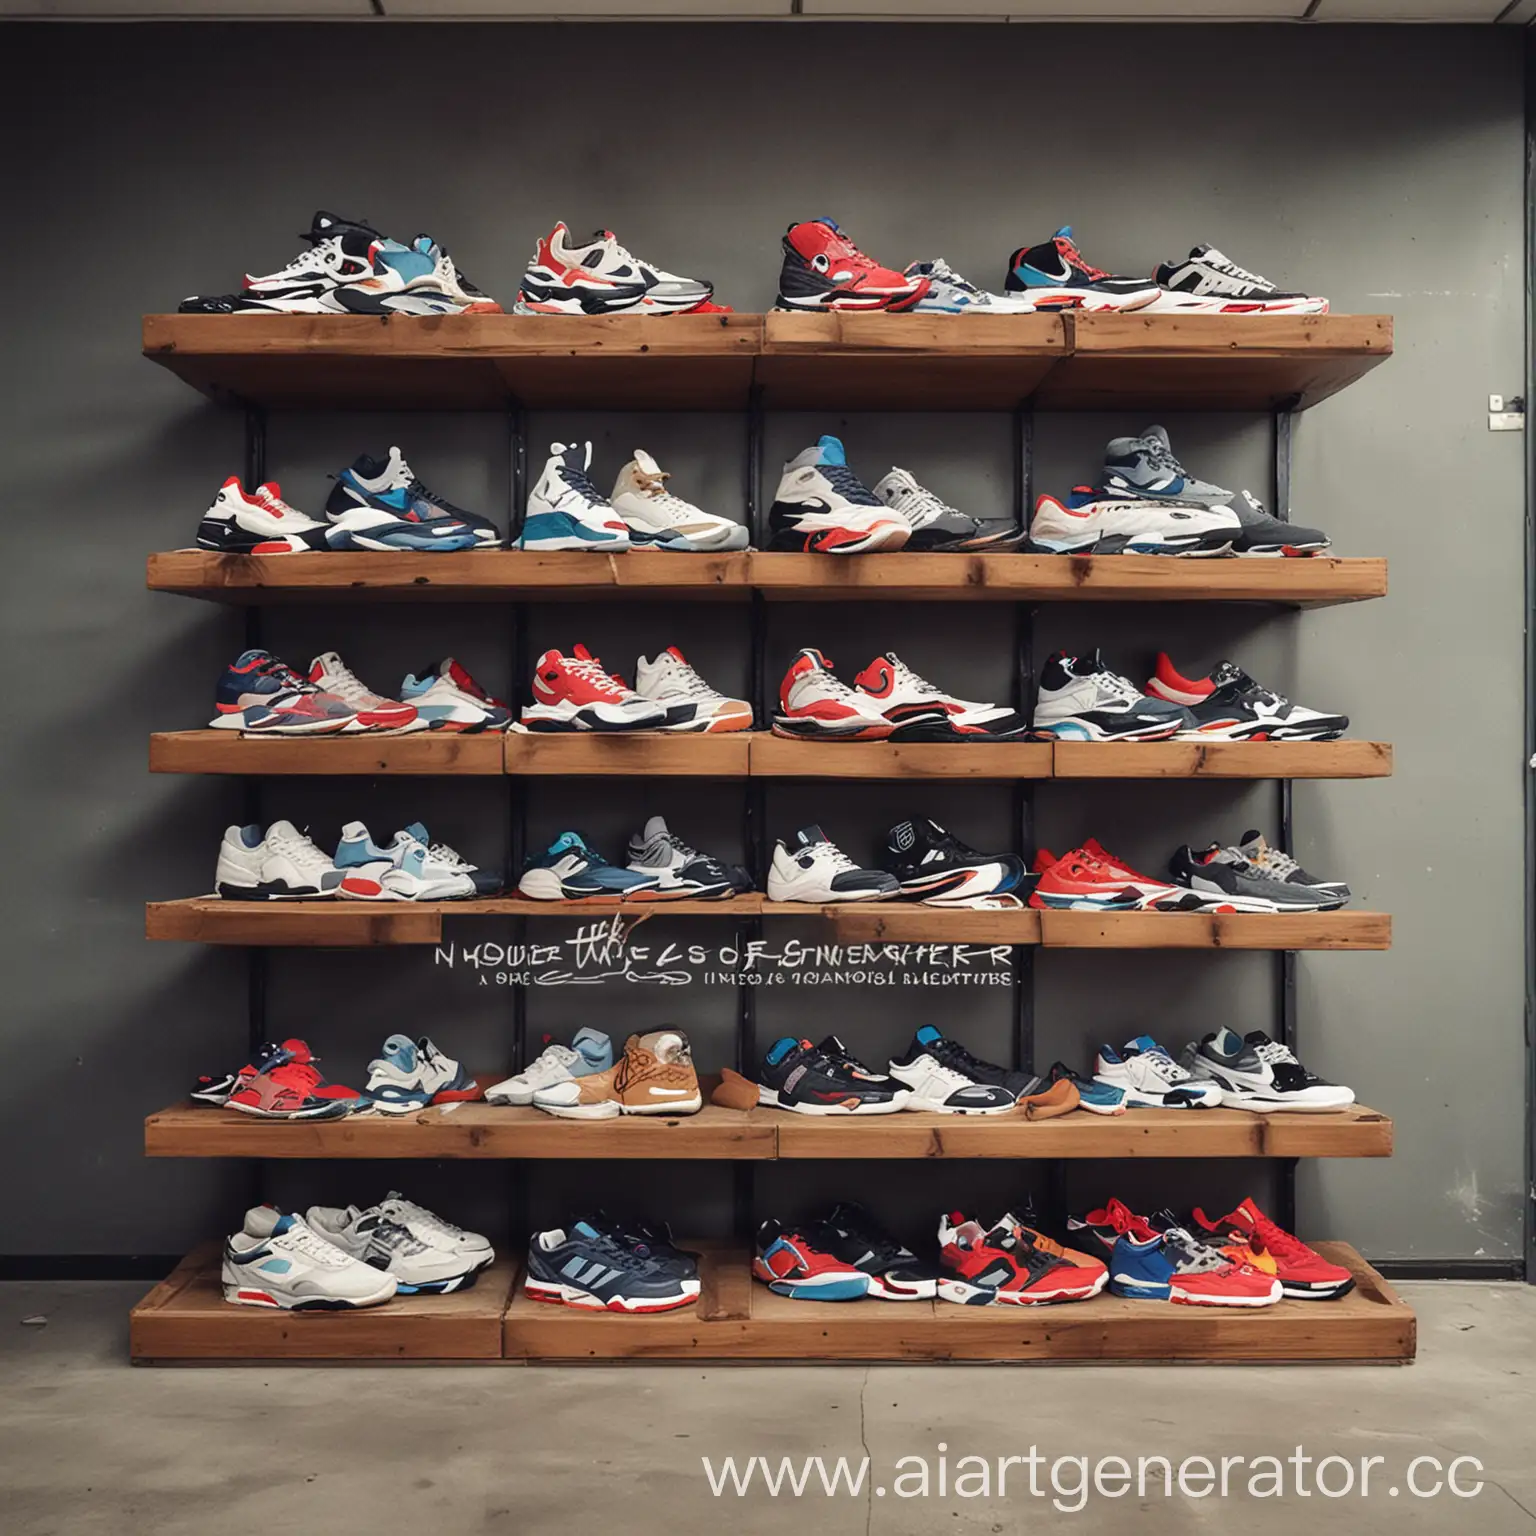 Vibrant-Sneaker-Collection-in-Urban-Home-Setting